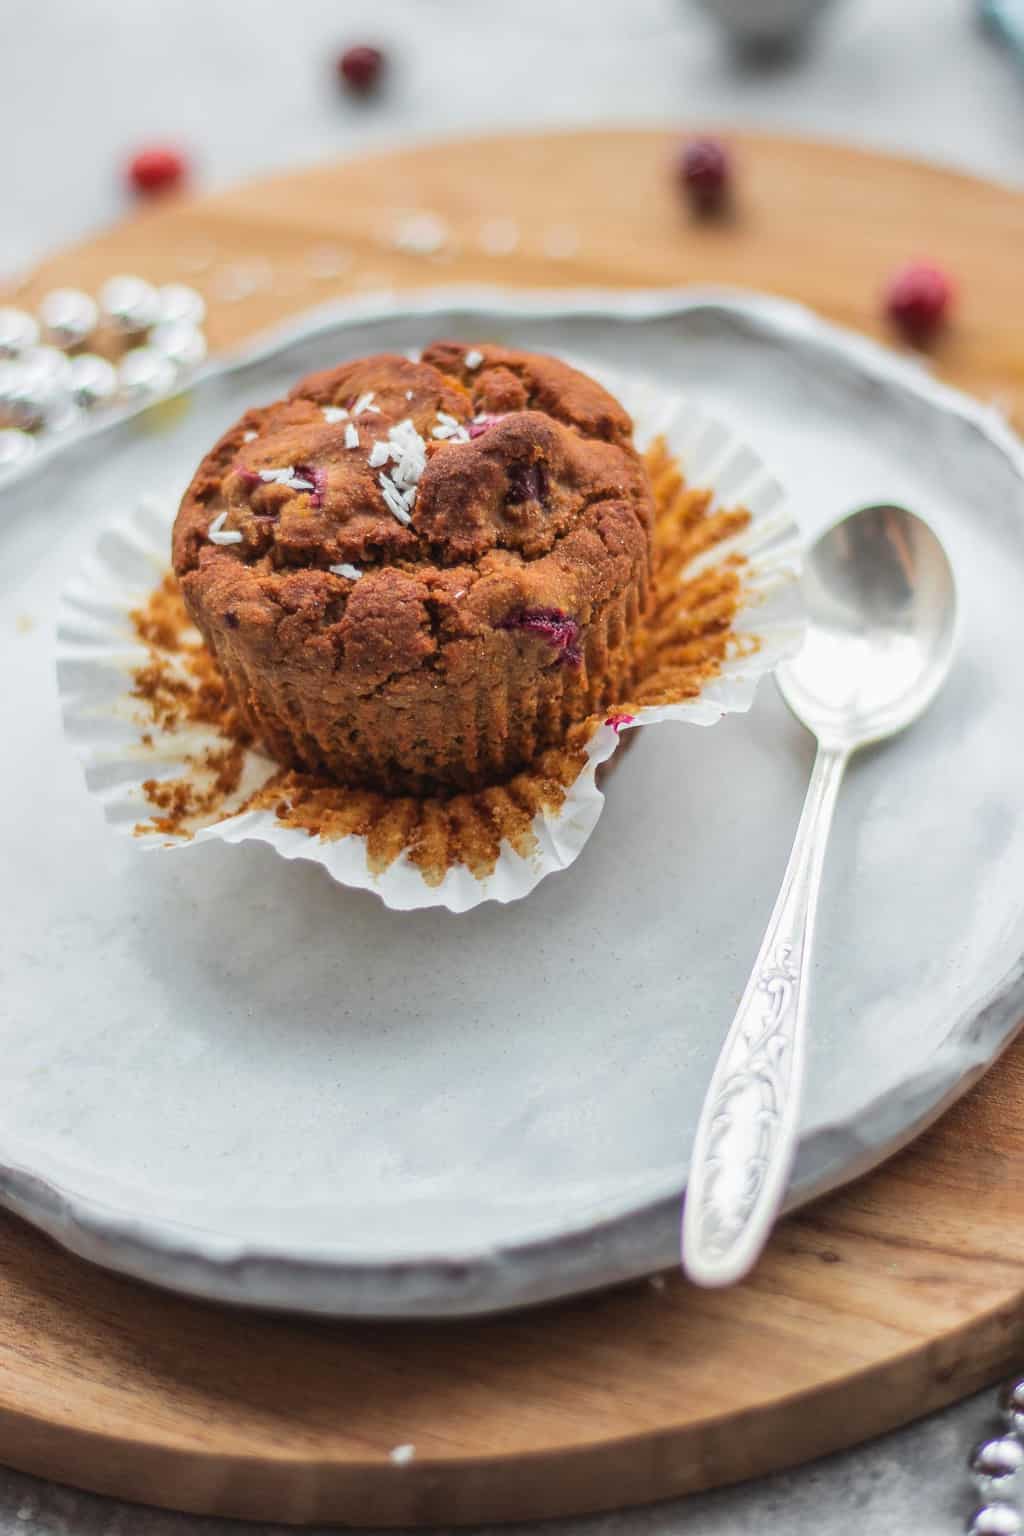 cranberry orange muffin being served on a white plate